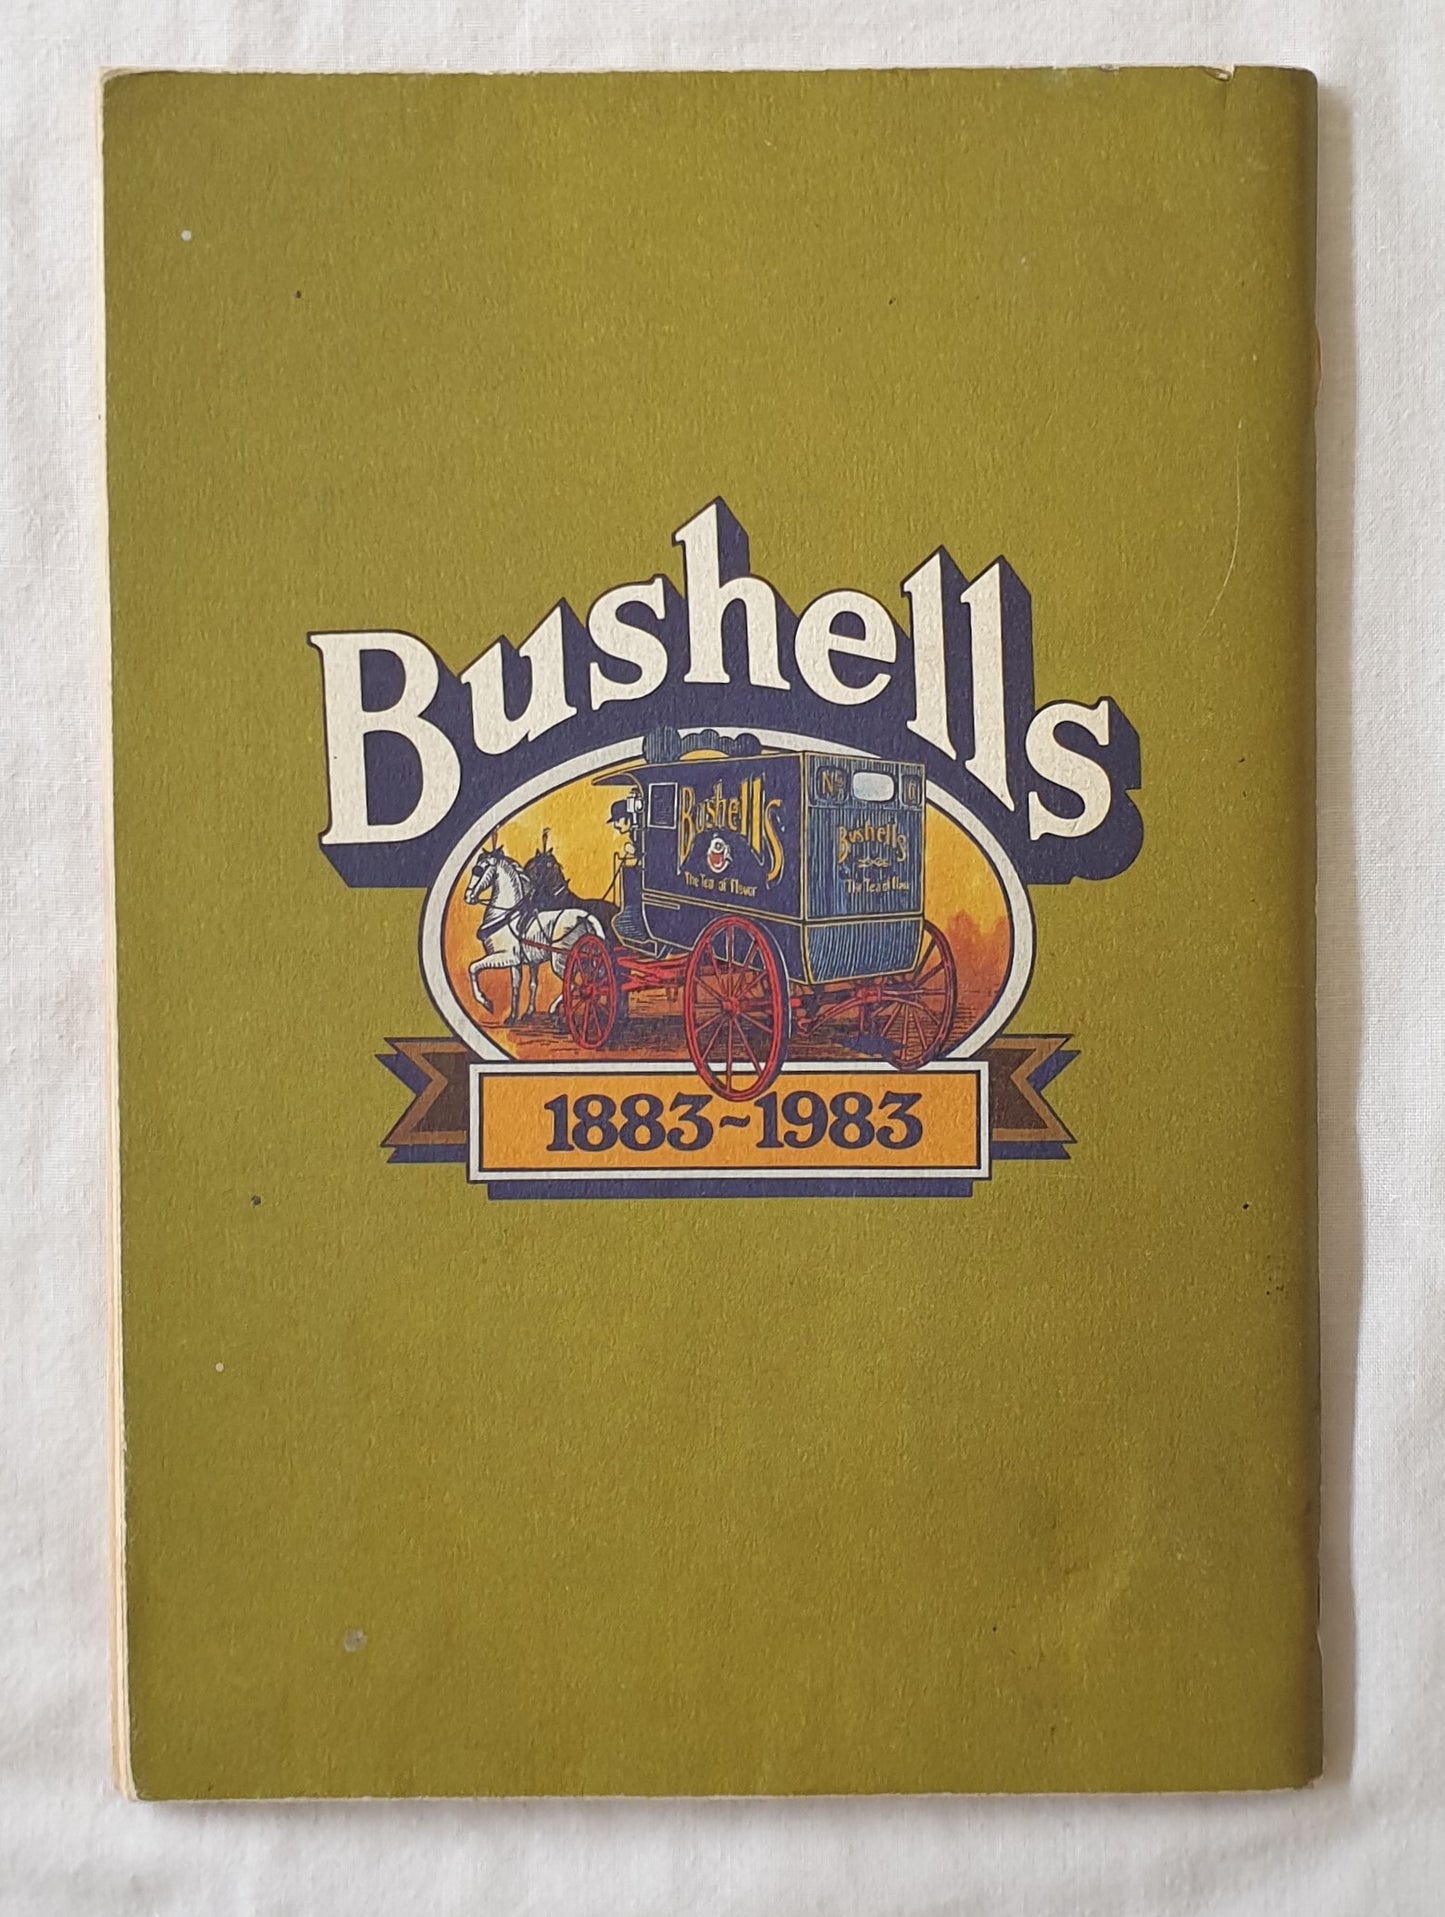 Recipes from Australia’s Past Bushell’s Cook Book